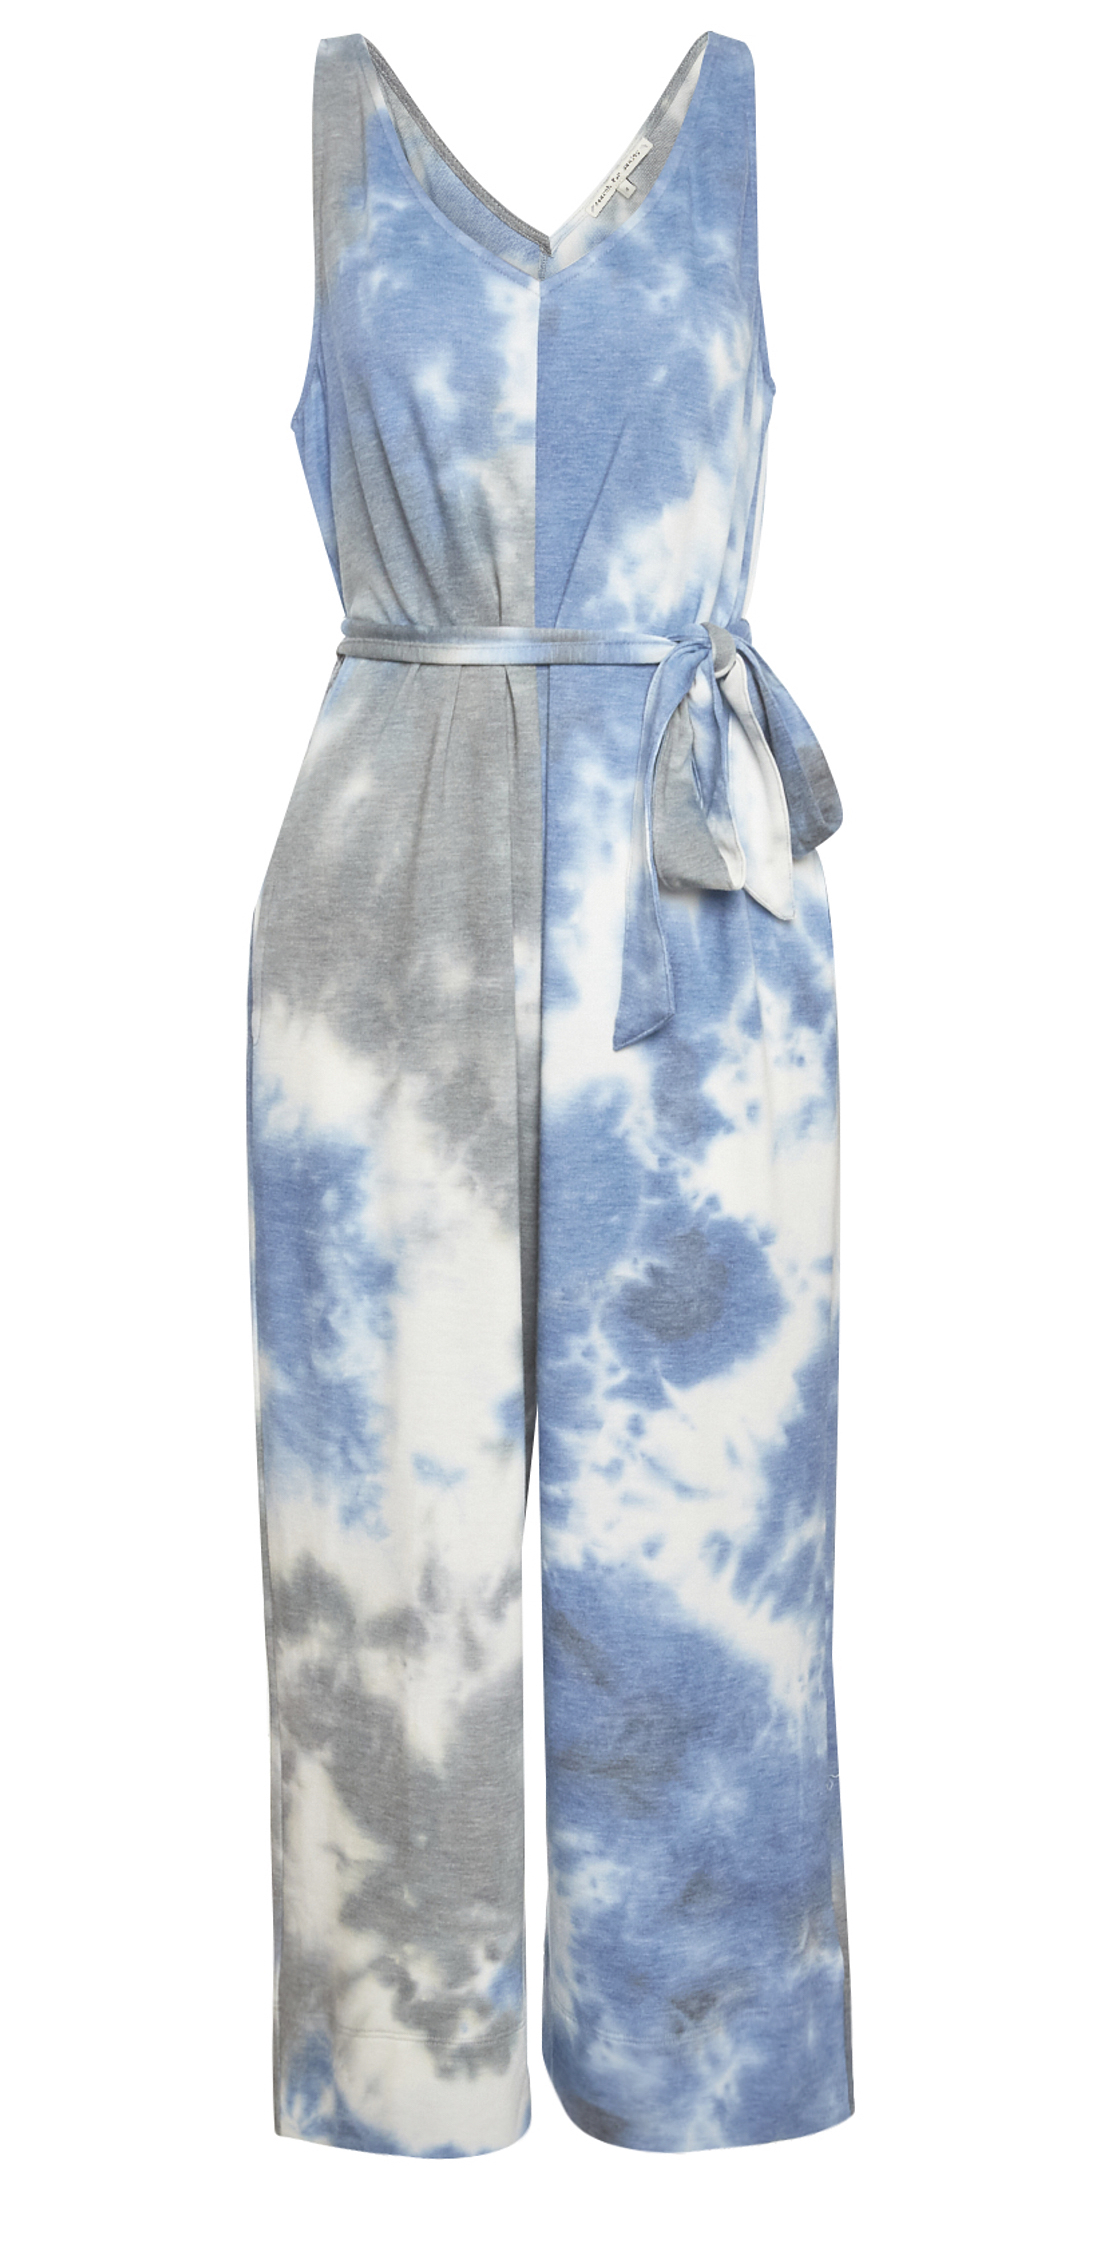 Search for Sanity Tie Dye Belted Jumpsuit